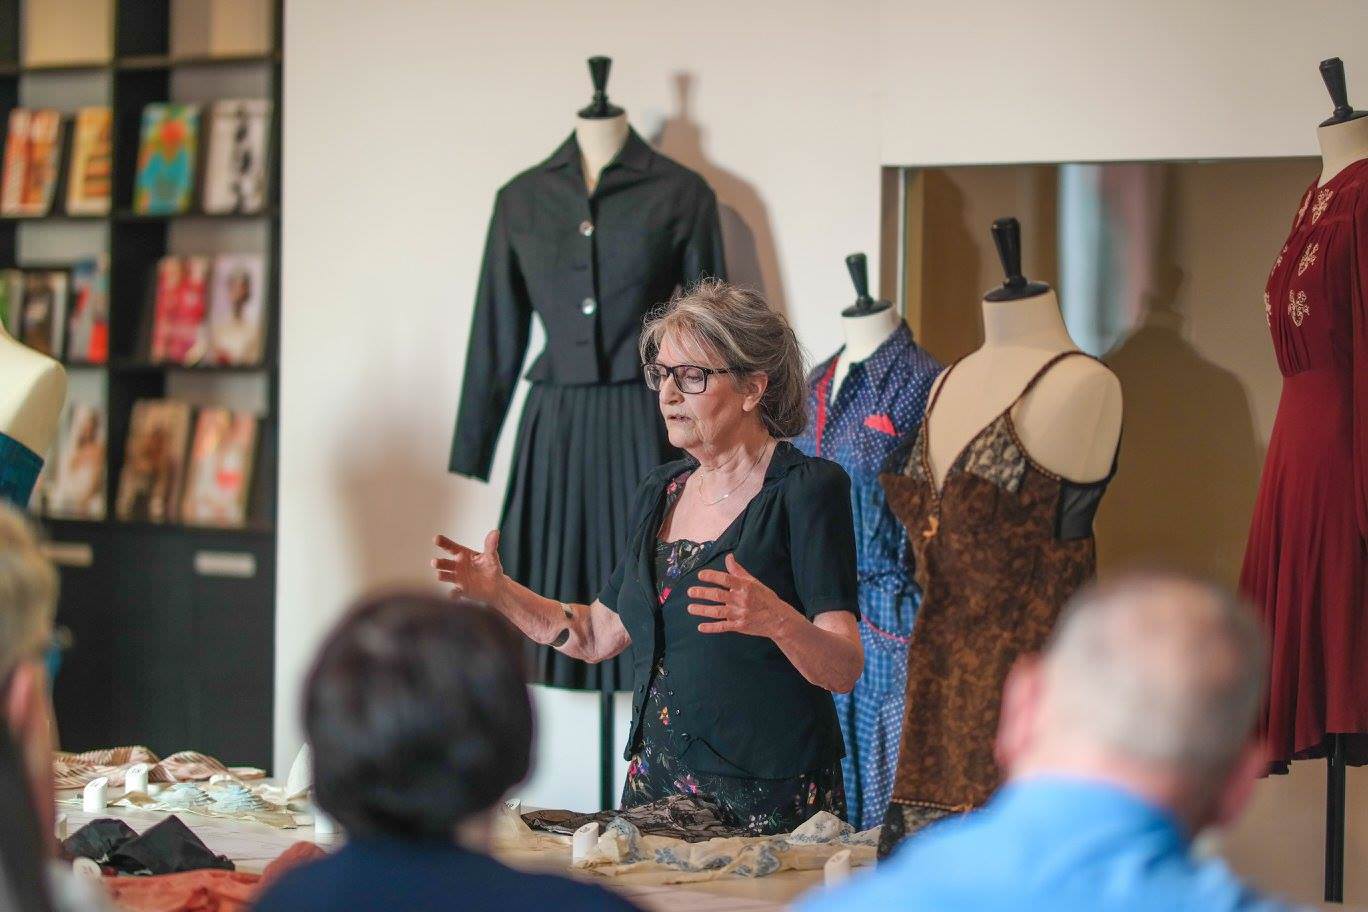 Fashion, identity & time: The stories behind the clothes  – secondary education